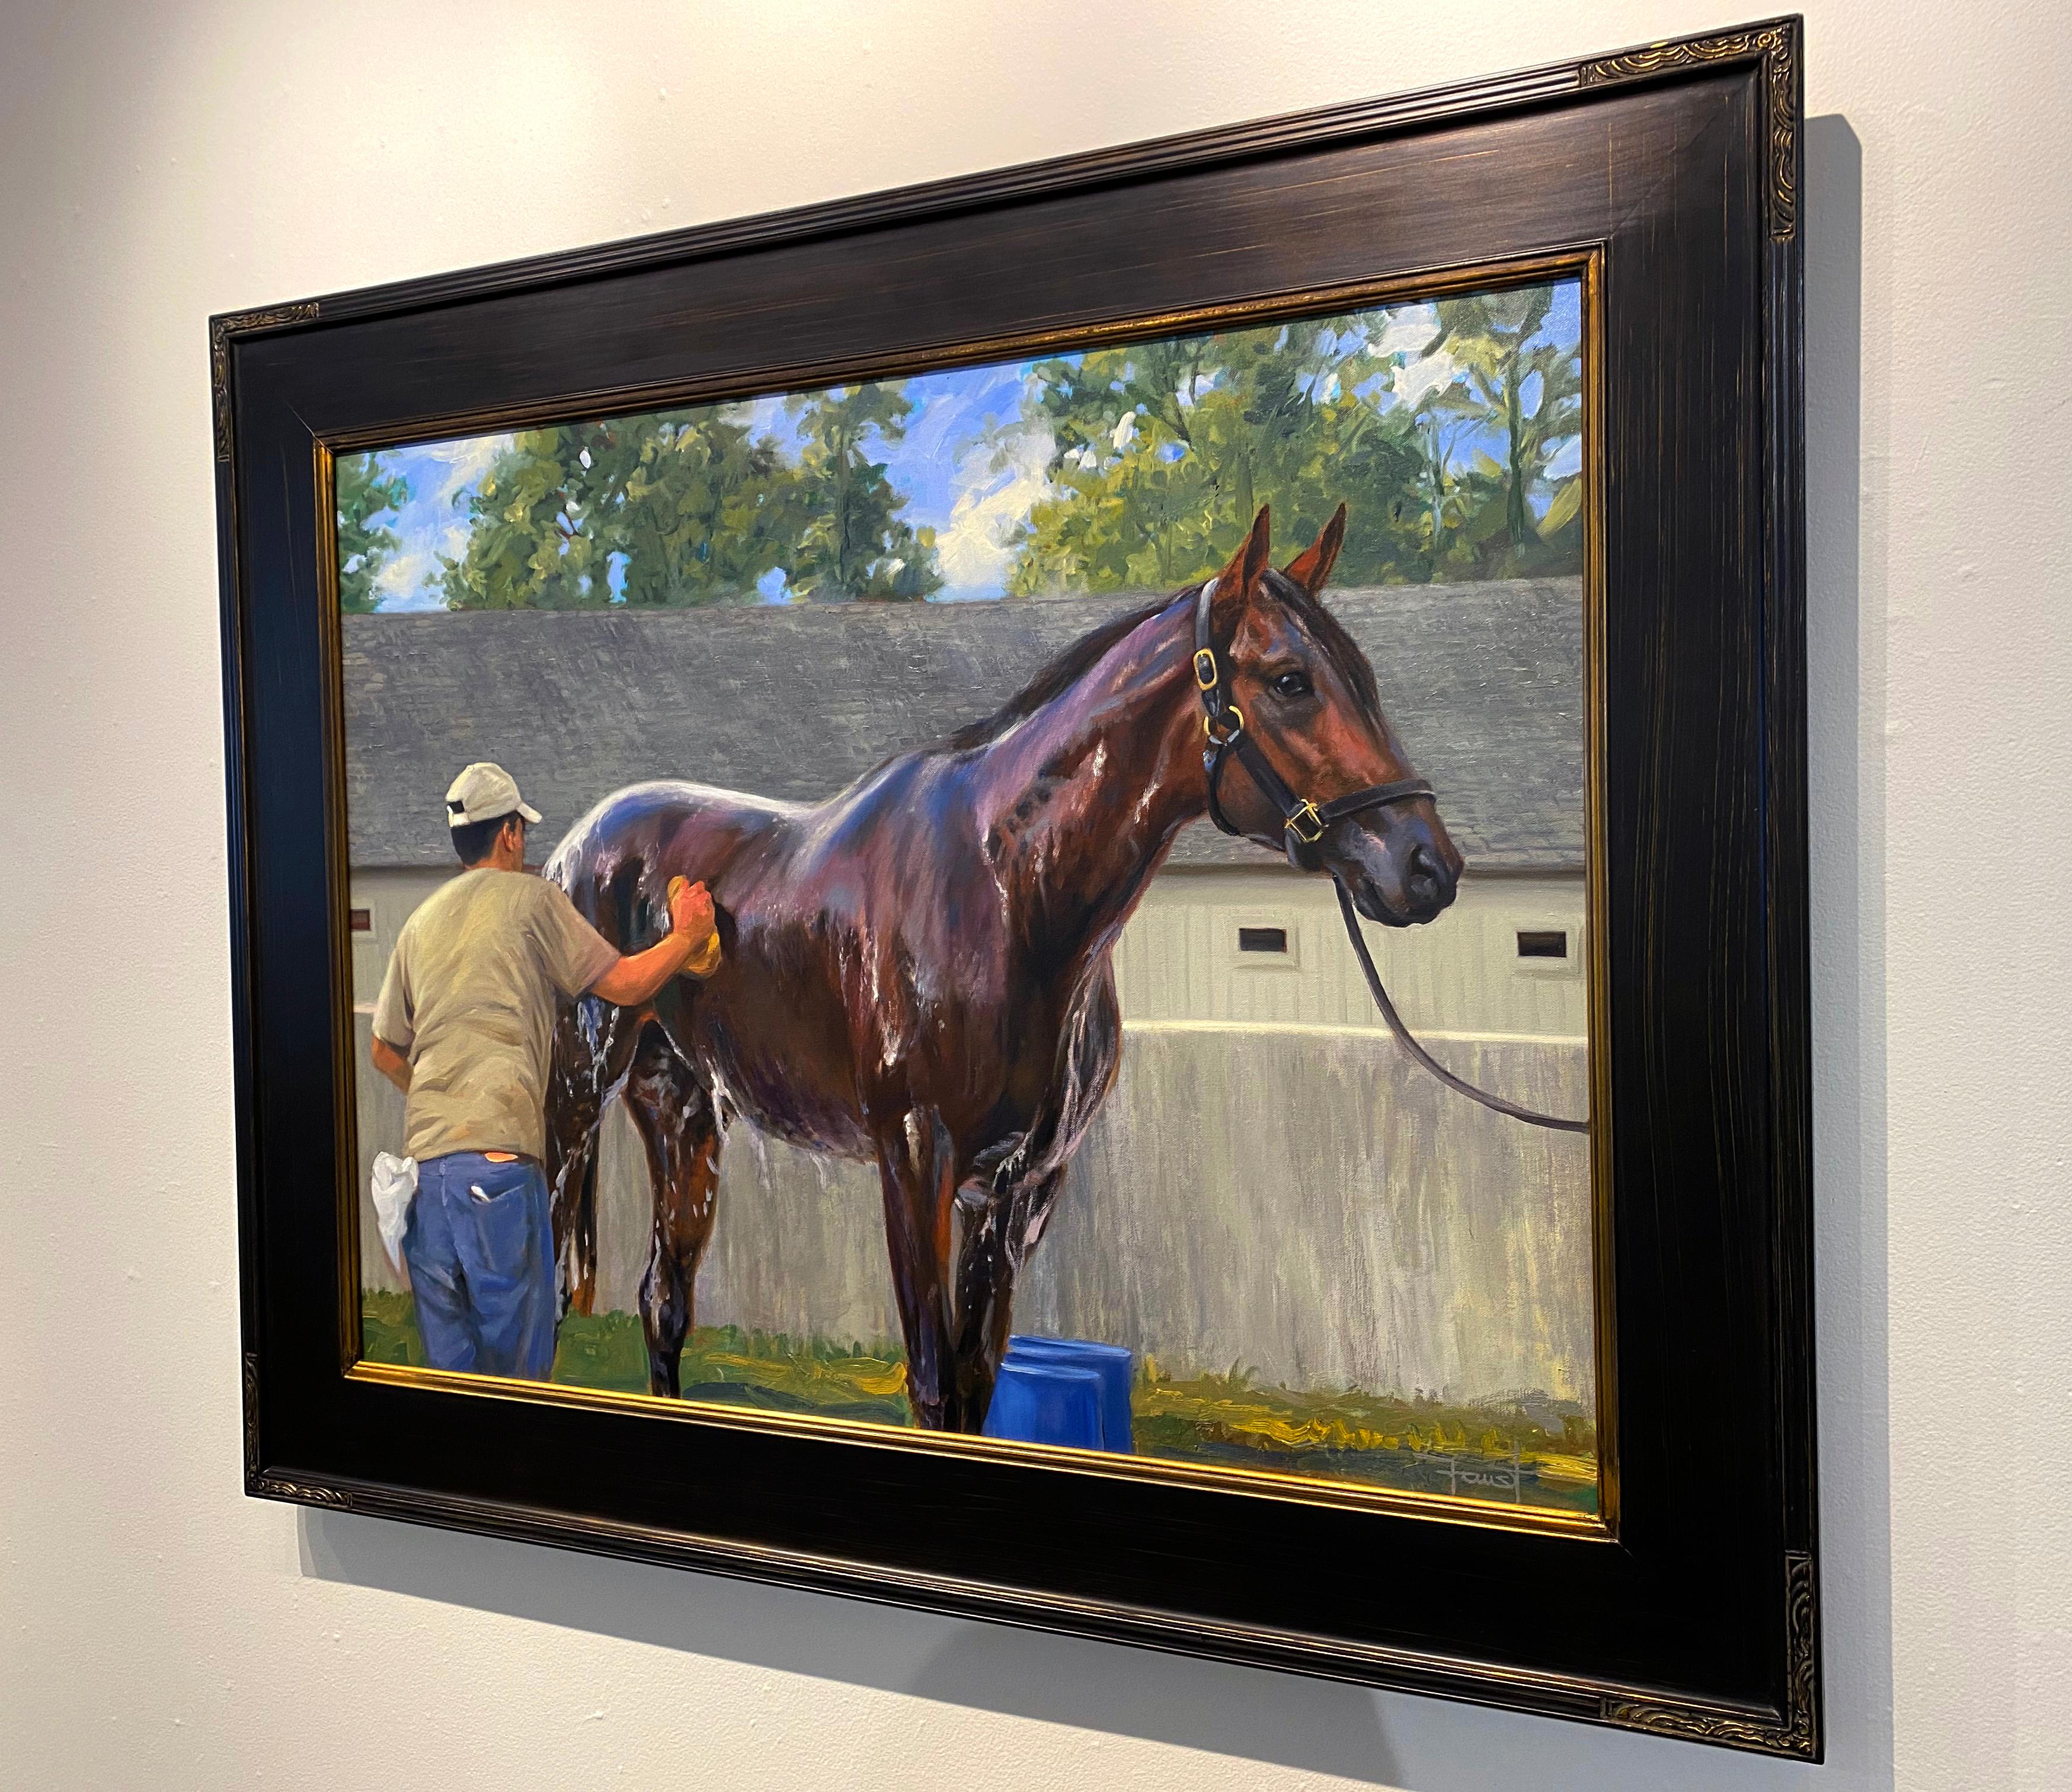 This equine painting, 